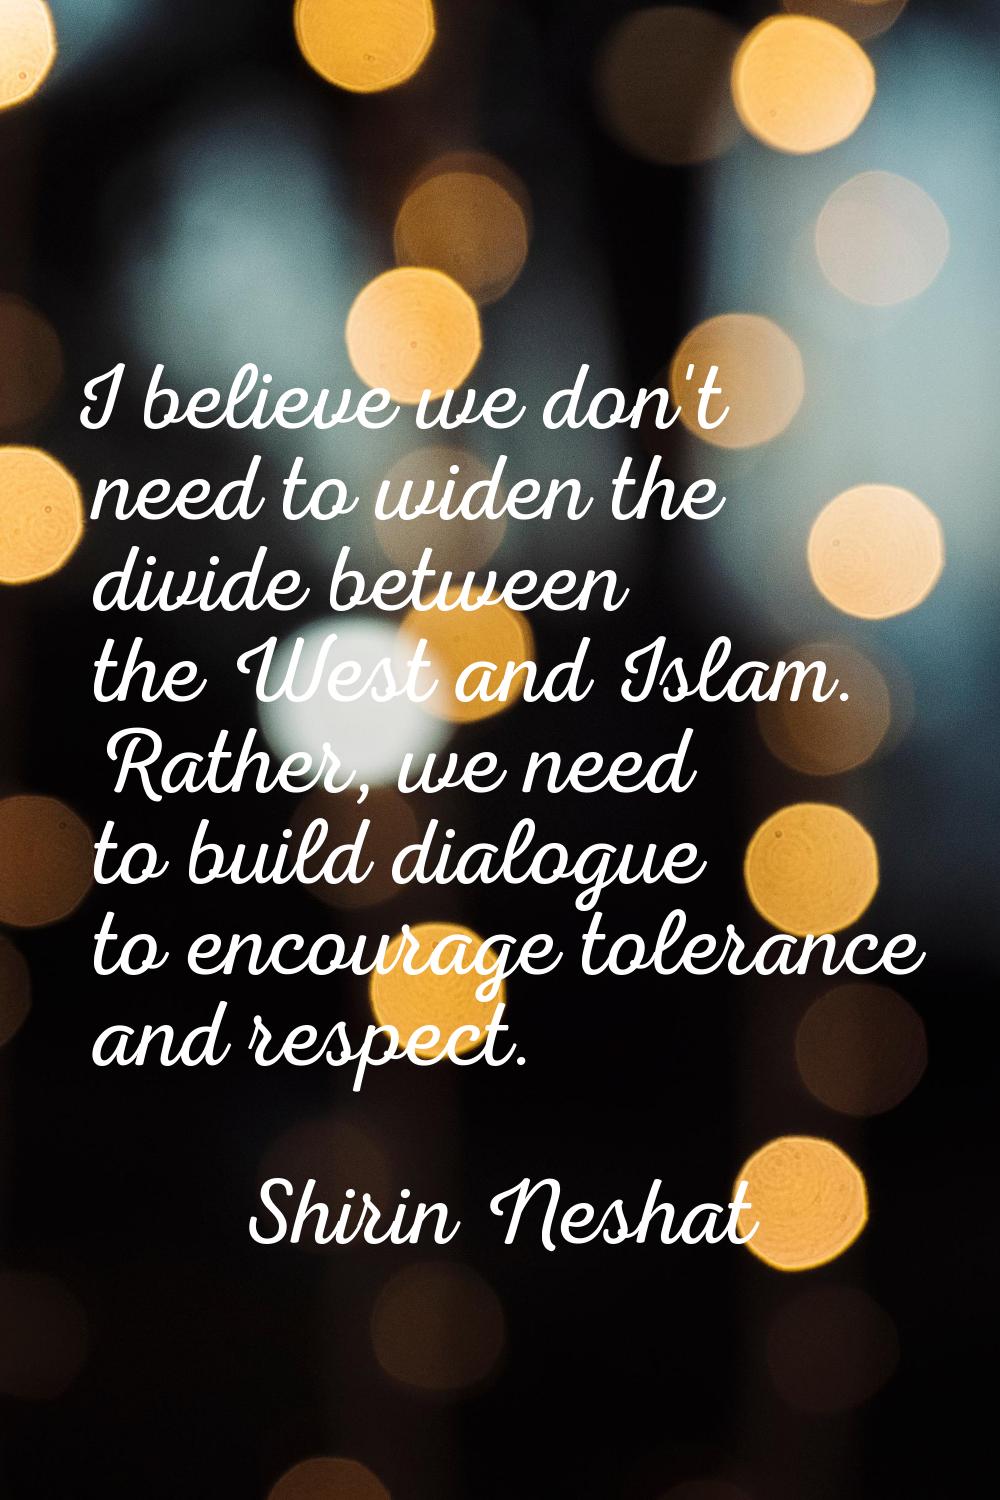 I believe we don't need to widen the divide between the West and Islam. Rather, we need to build di